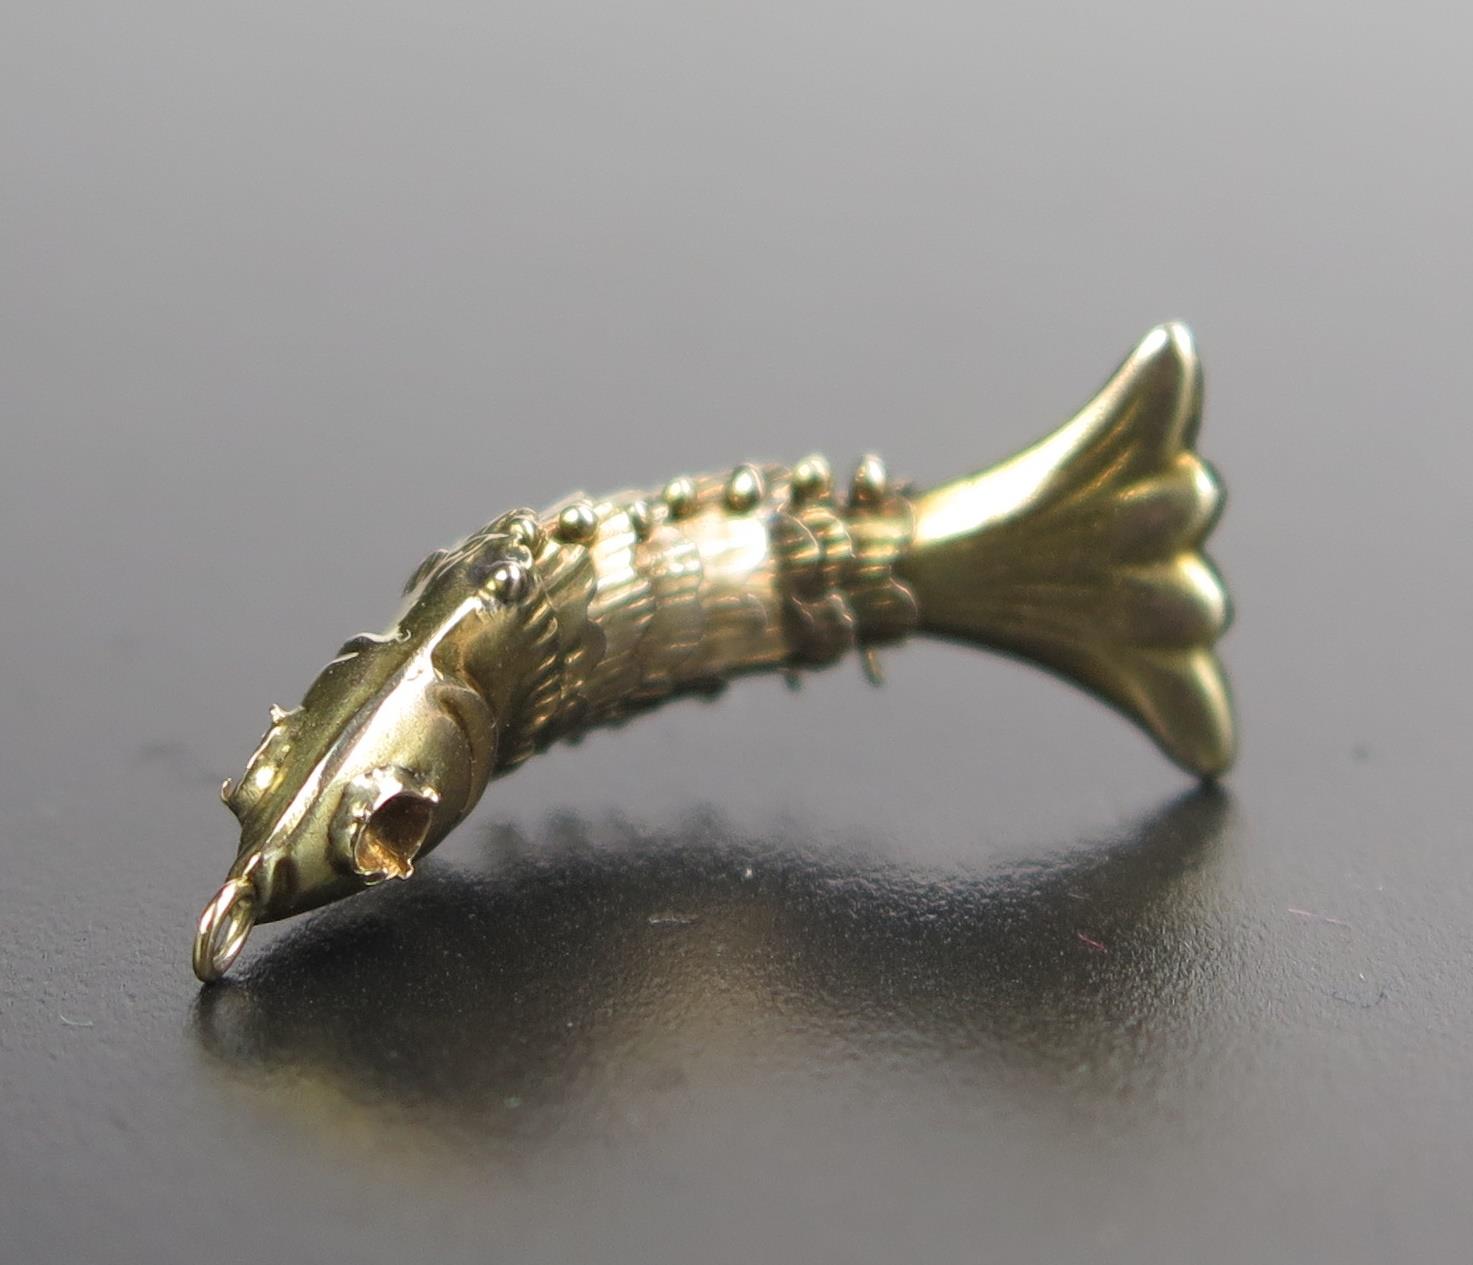 A 14K Gold Stamped Charm in the form of an articulated fish, 1.1g - Image 2 of 2